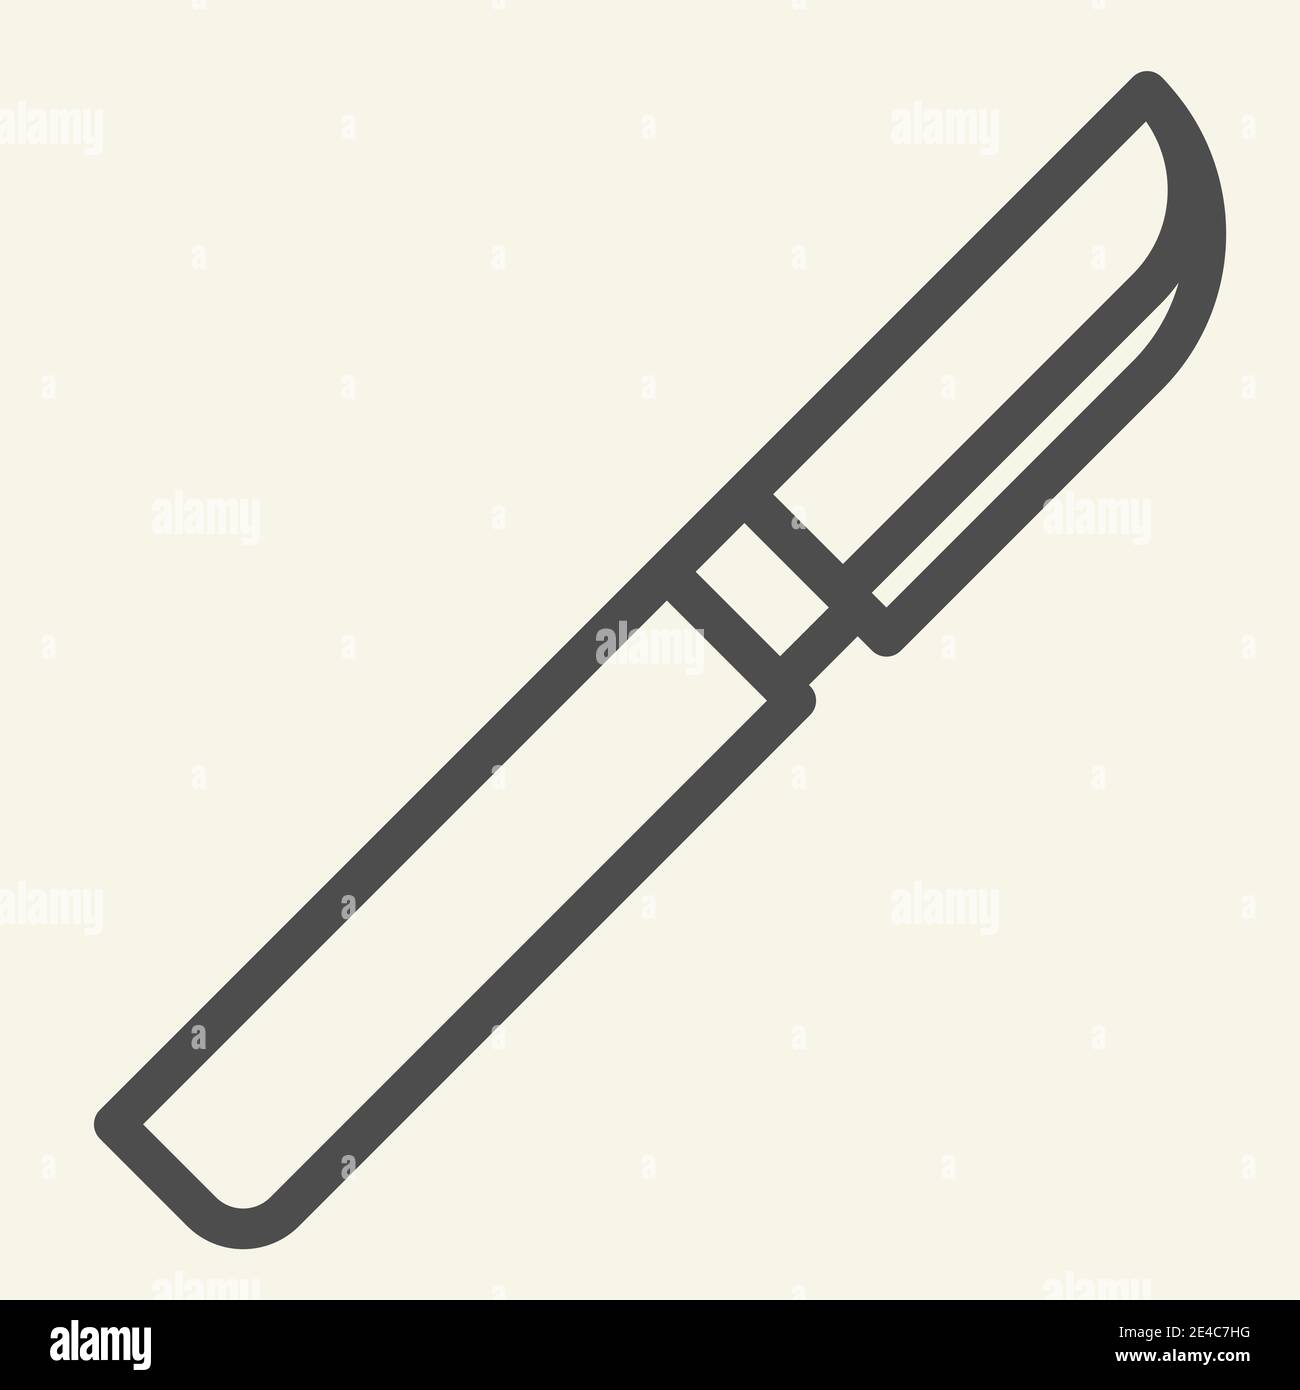 Scalpel line icon. Medical surgeon tool outline style pictogram on white background. Surgical scalpel knife symbol for mobile concept and web design Stock Vector